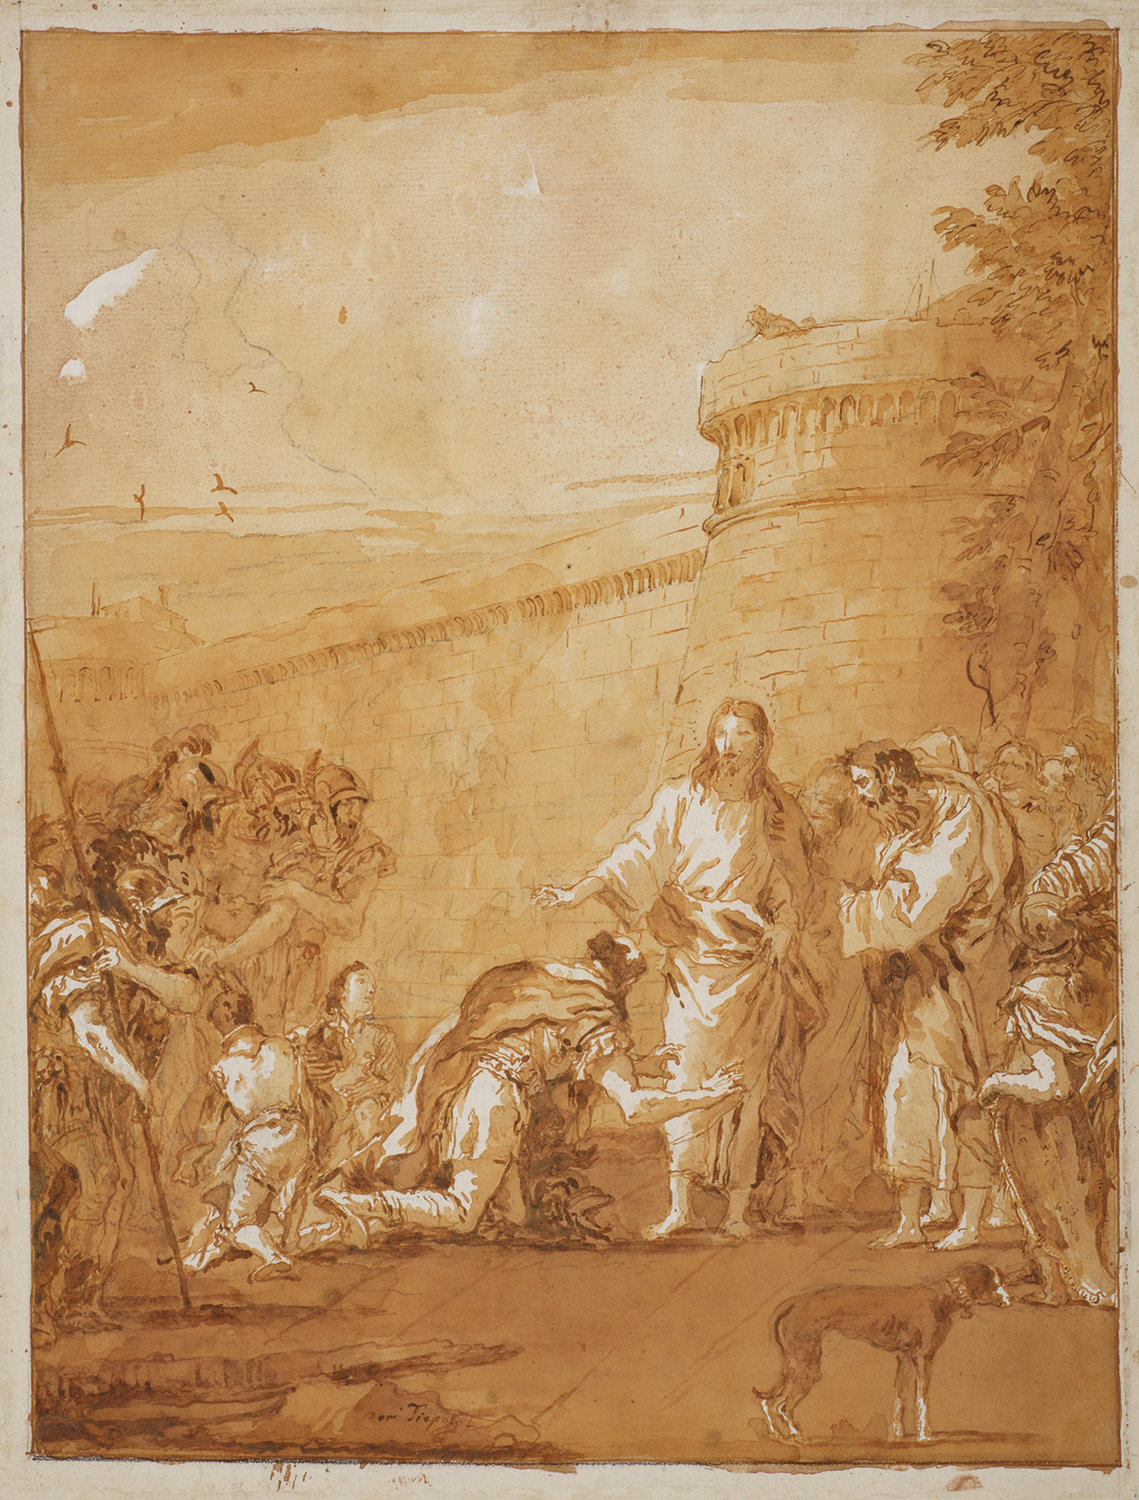 EARLY CHRISTIANITY—Giandomenico Tiepolo, “Christ and the Centurion of Capernaum,” ca. 1786–90. Pen and brown ink, orange-brown wash, and black chalk over a black chalk underdrawing on off-white laid paper. 19 5/16 x 15 1/8 inches. Promised gift from the Collection of Elizabeth and Jean-Marie Eveillard.